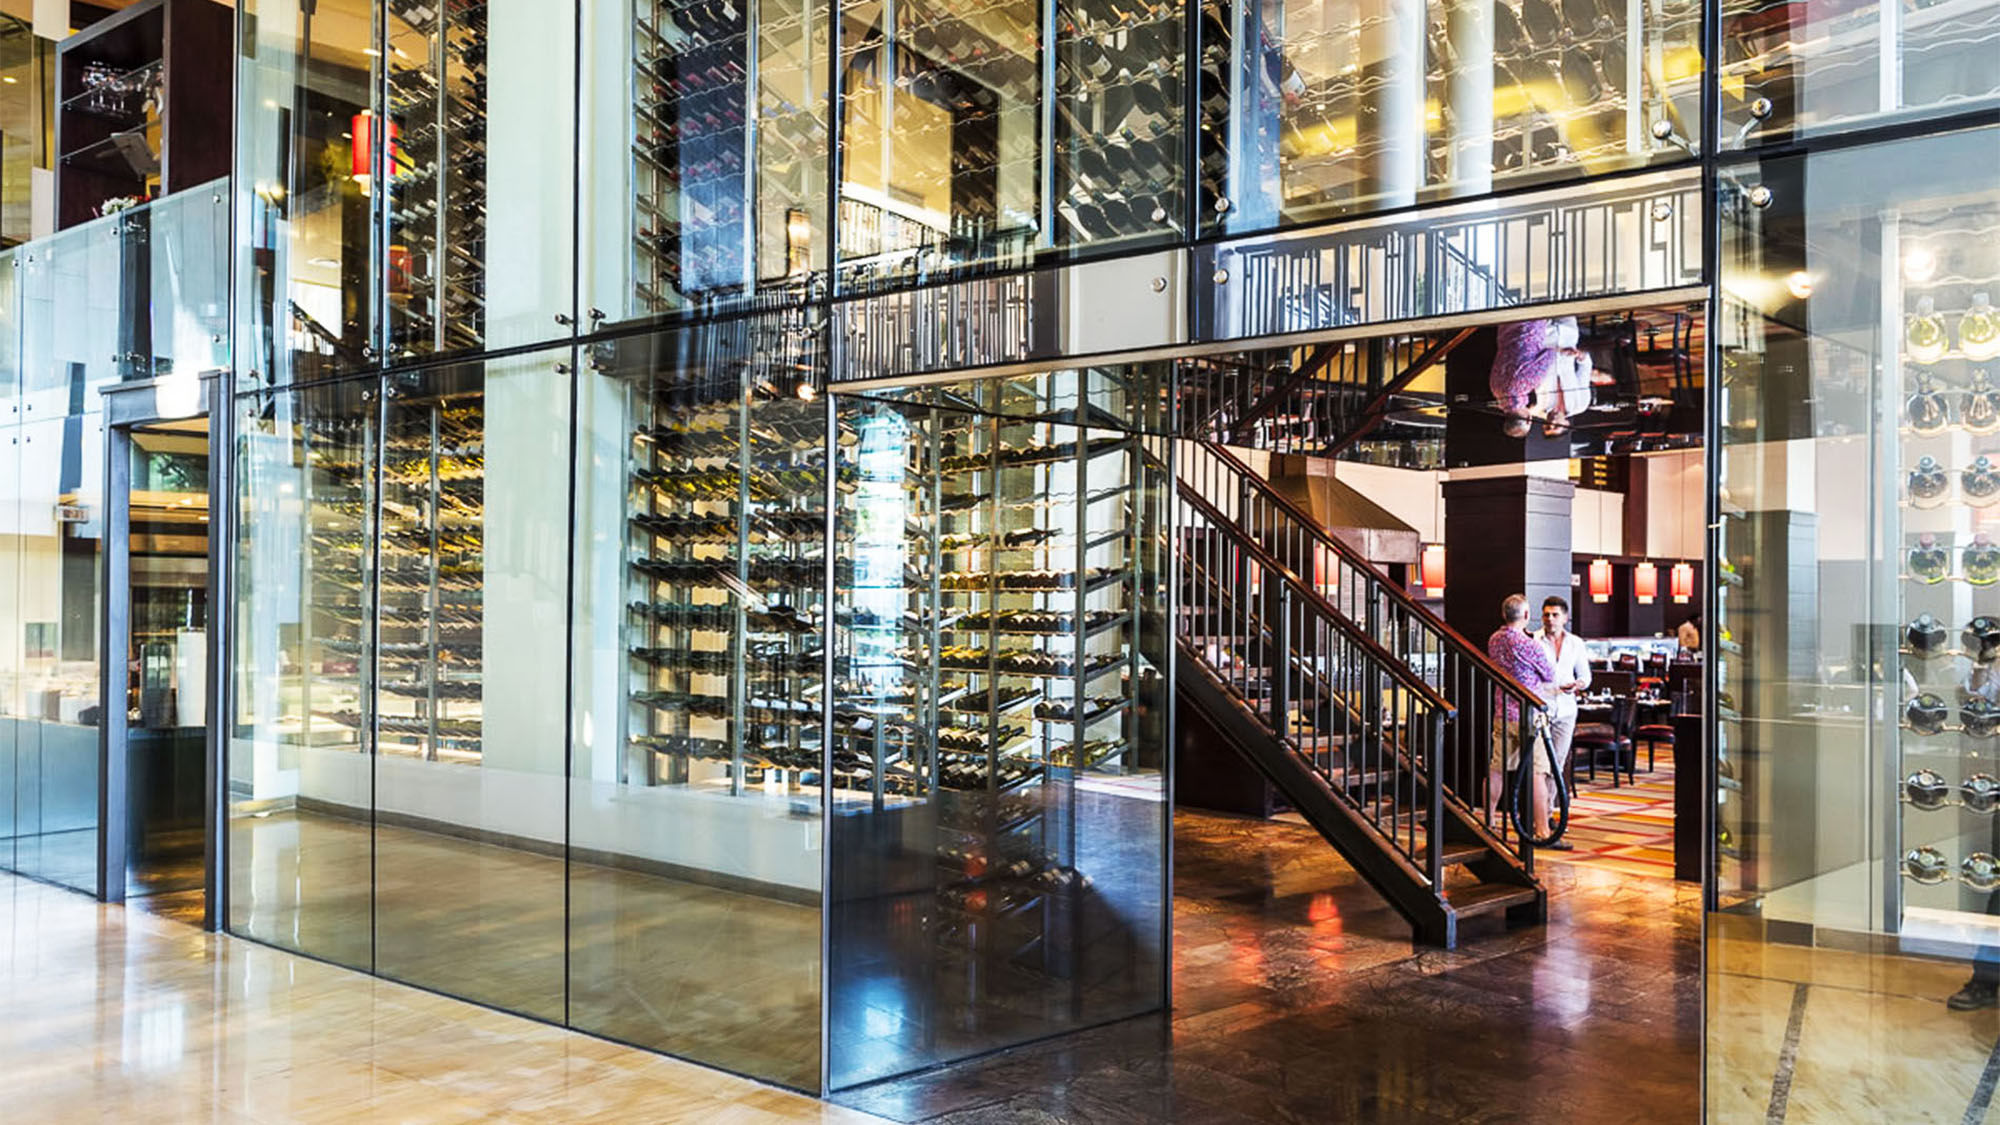 The hotel's Wine Studio, where guests can blend their own wines under the guidance of a top sommelier.